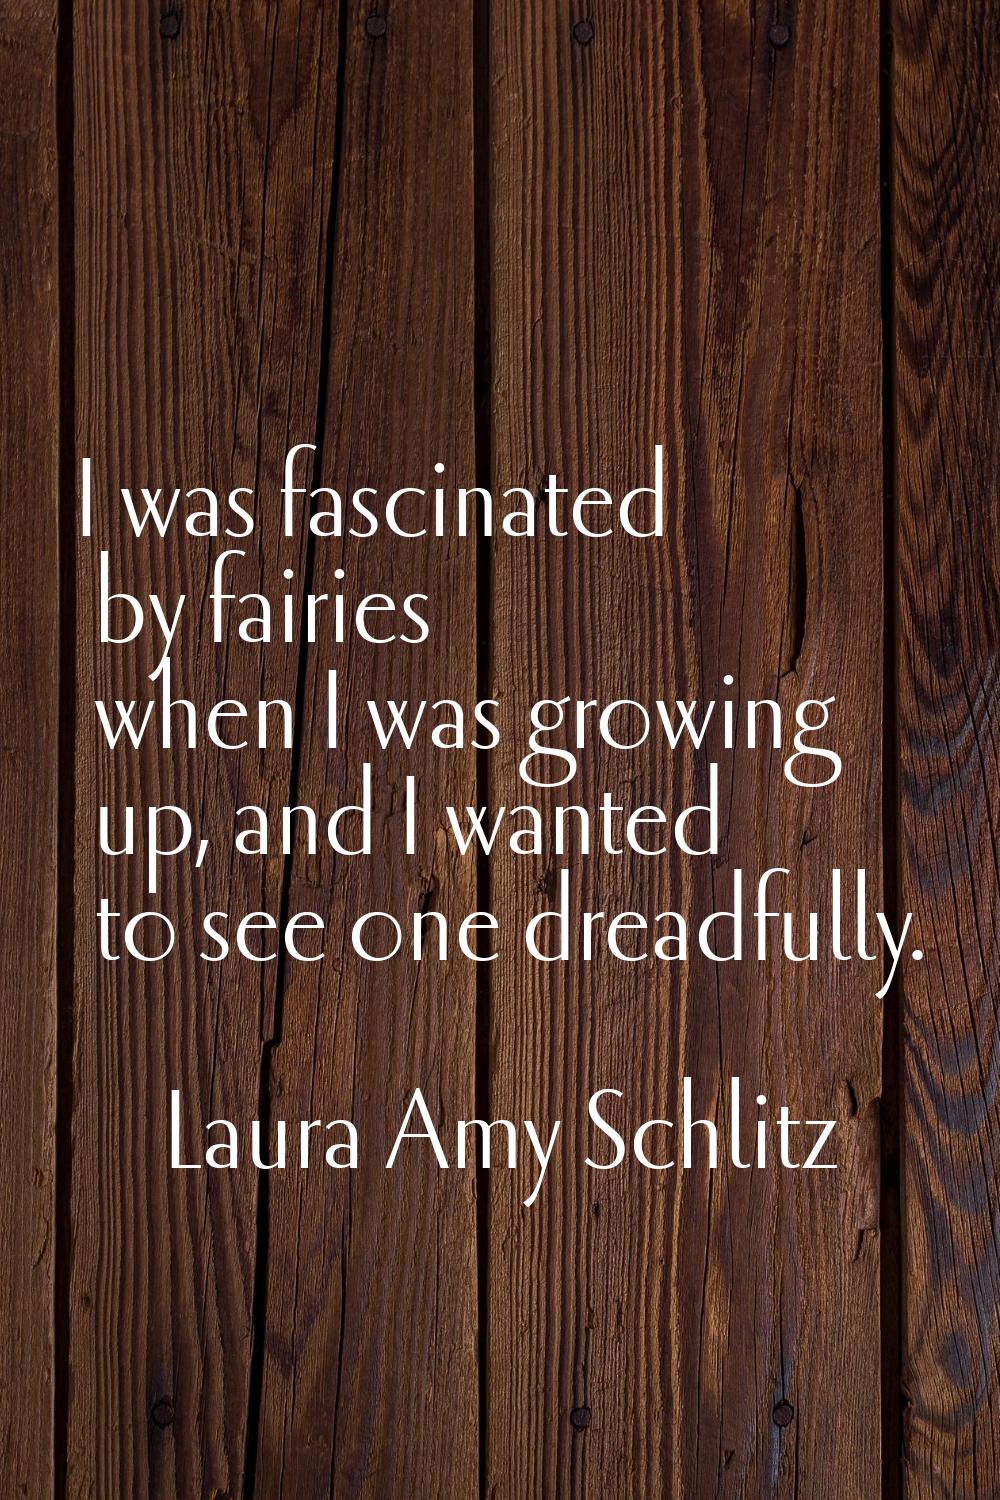 I was fascinated by fairies when I was growing up, and I wanted to see one dreadfully.